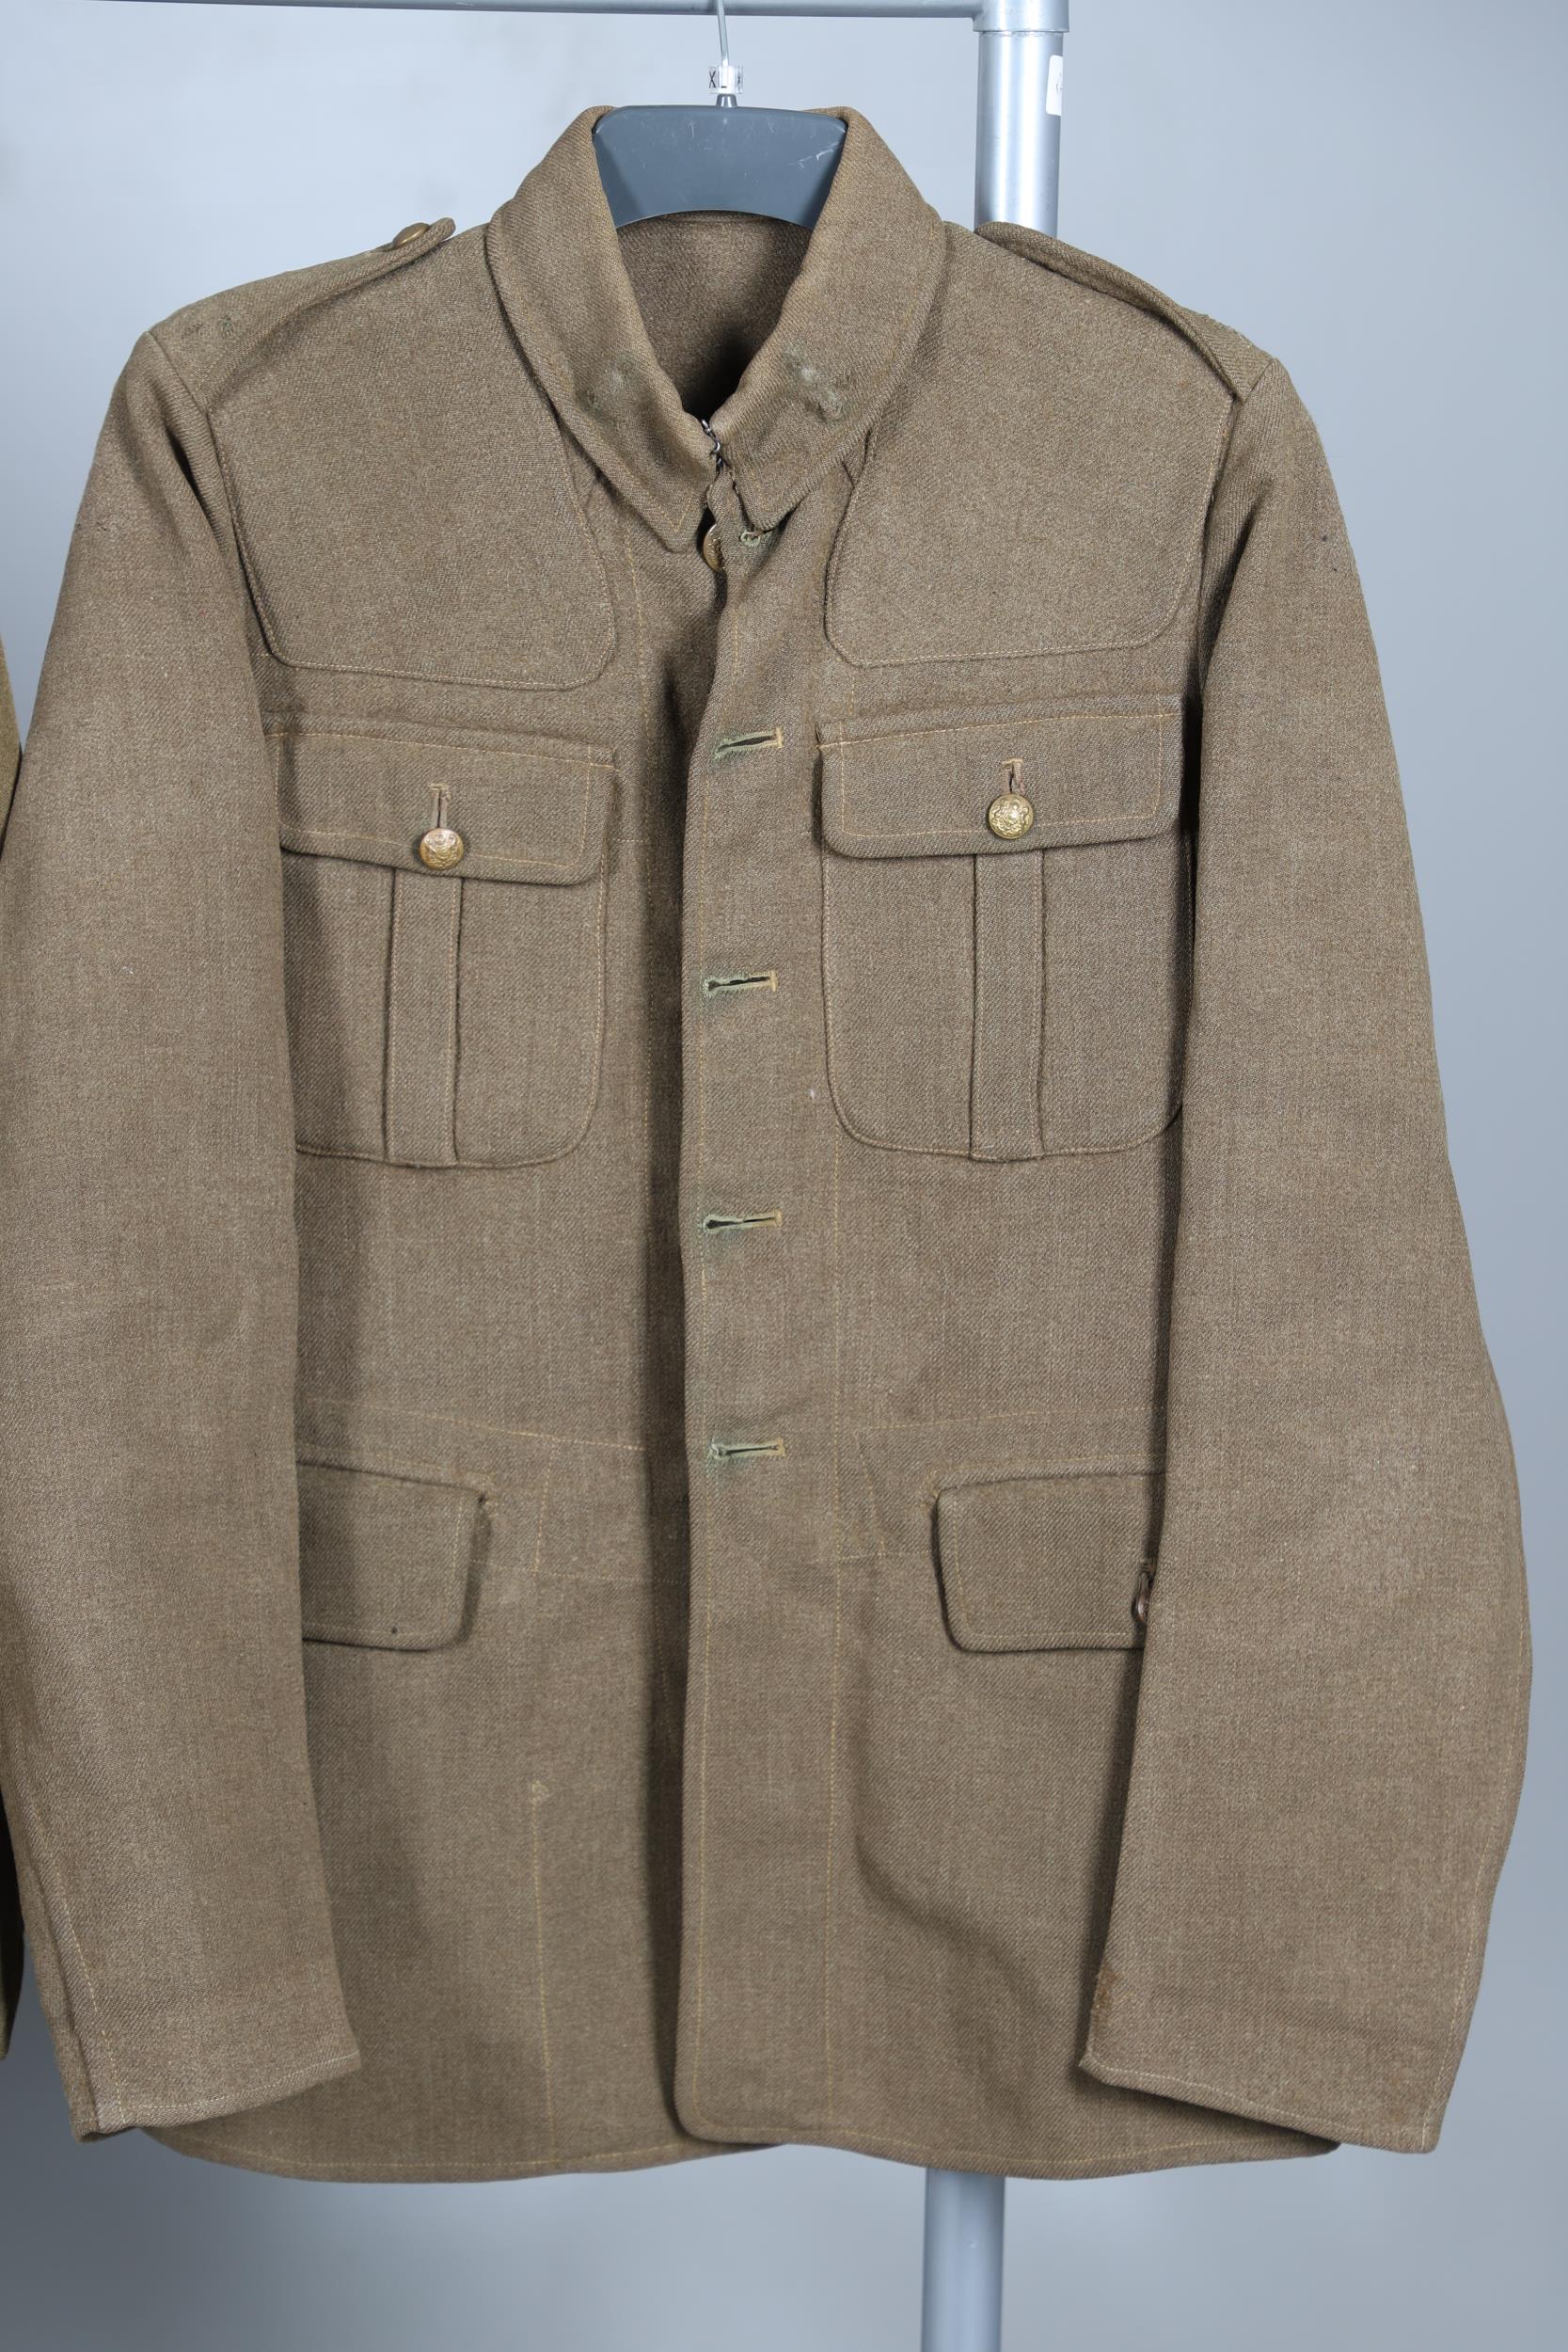 THREE 1922 PATTERN OR SIMILAR JACKETS WITH GENERAL SERVICE BUTTONS. - Image 4 of 12